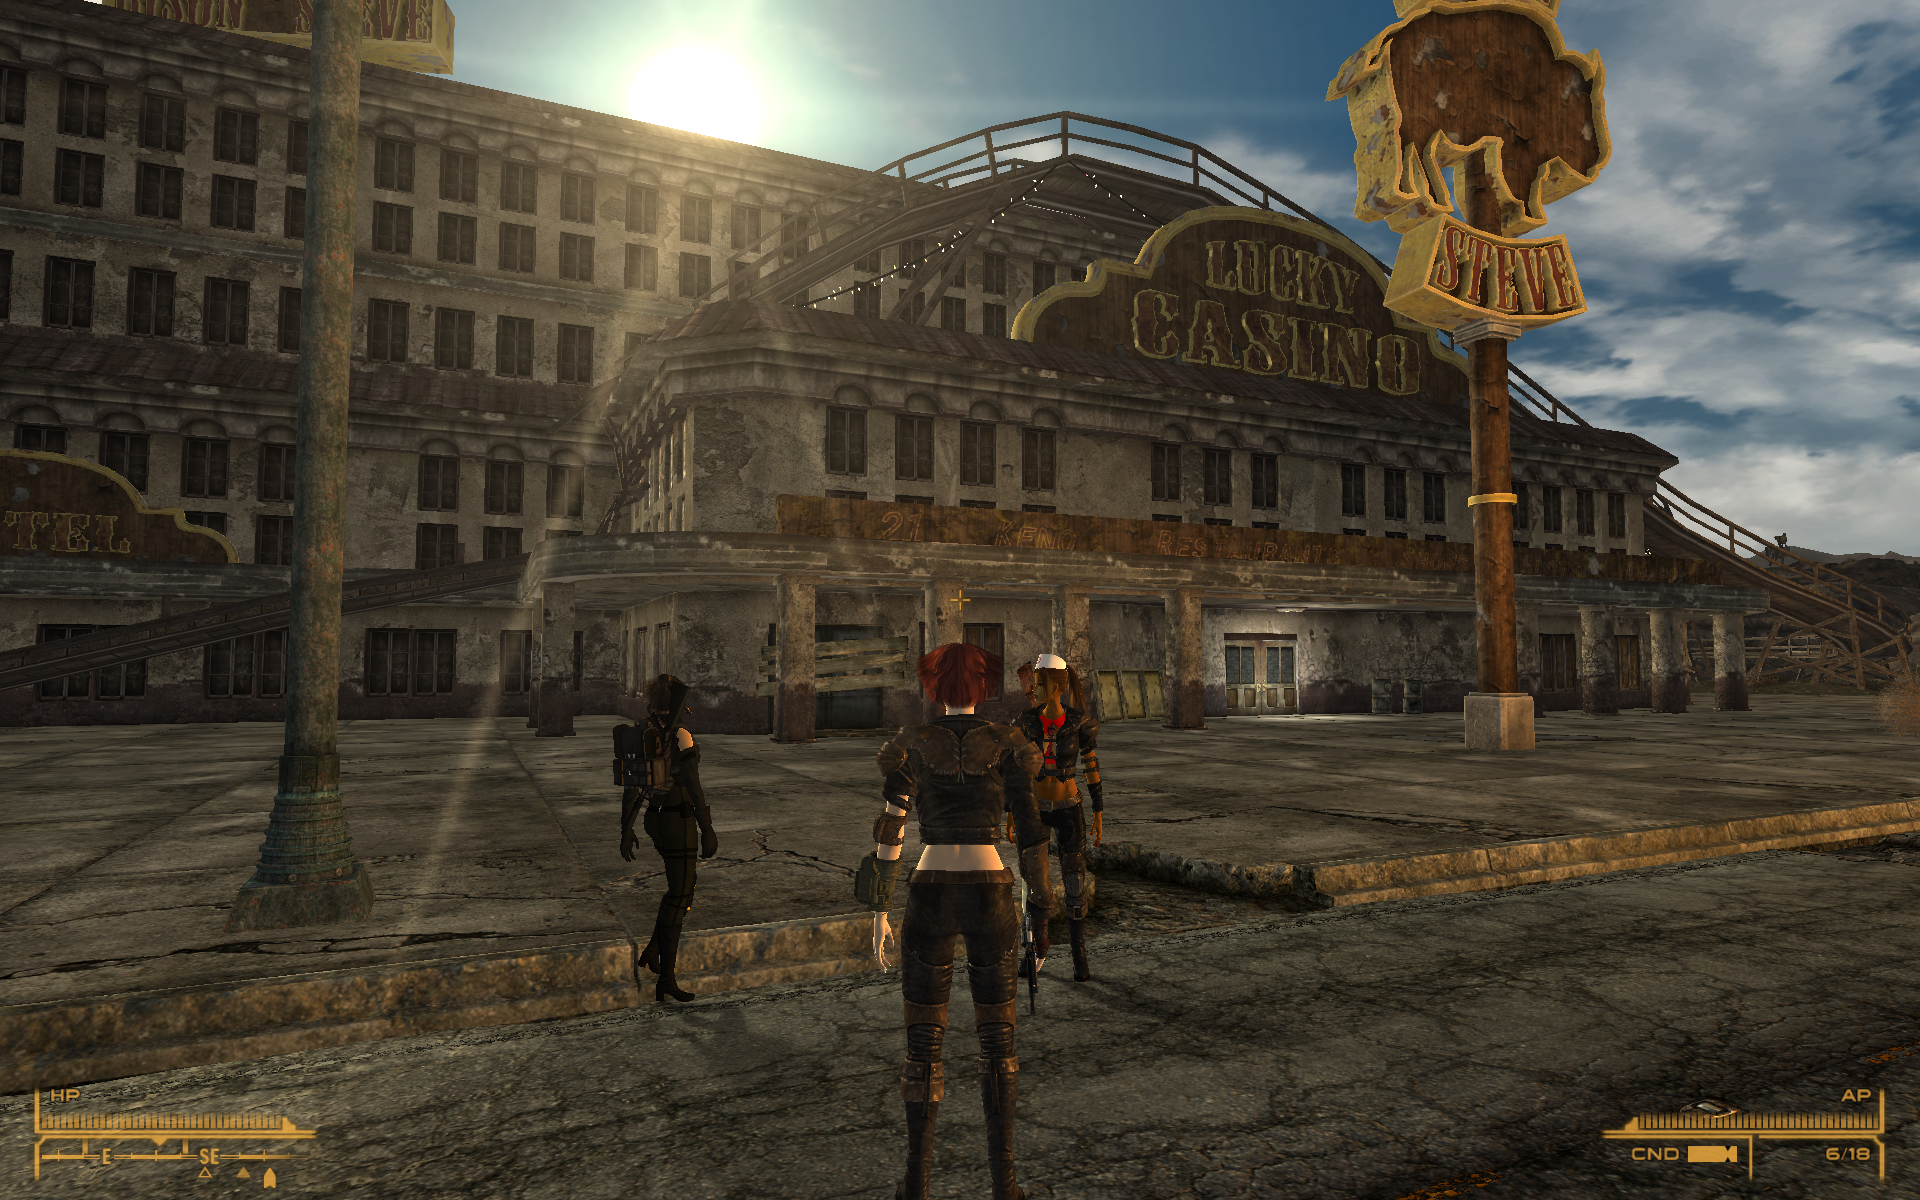 Fallout New Vegas with mods, screenshot of Bison Steve's in Primm, the main character and two companions